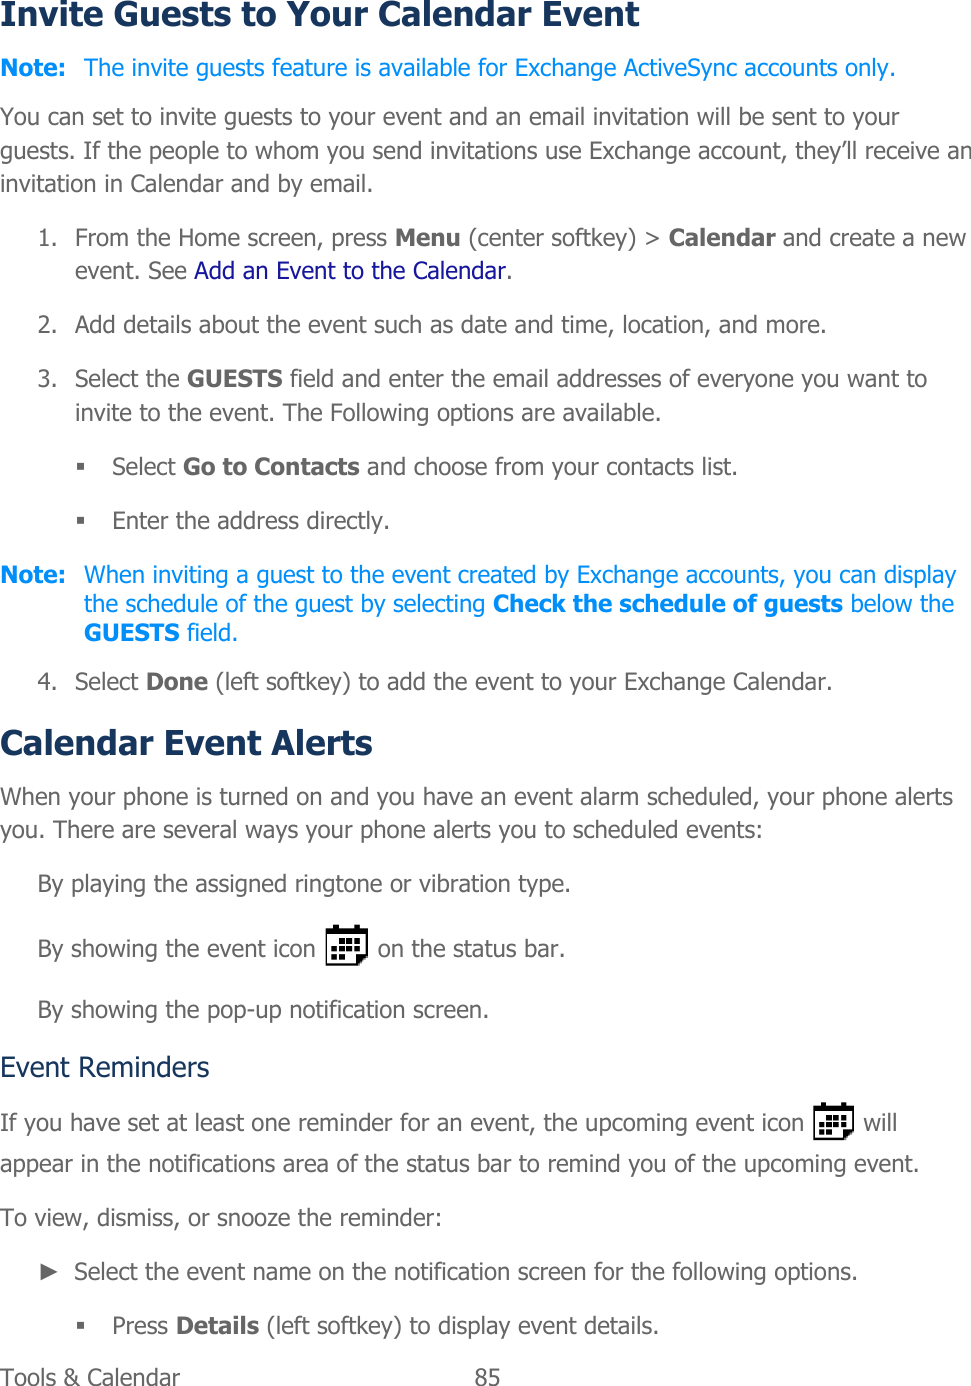  Tools &amp; Calendar  85   Invite Guests to Your Calendar Event Note: The invite guests feature is available for Exchange ActiveSync accounts only. You can set to invite guests to your event and an email invitation will be sent to your guests. If the people to whom you send invitations use Exchange account, they’ll receive an invitation in Calendar and by email. 1. From the Home screen, press Menu (center softkey) &gt; Calendar and create a new event. See Add an Event to the Calendar. 2. Add details about the event such as date and time, location, and more. 3. Select the GUESTS field and enter the email addresses of everyone you want to invite to the event. The Following options are available.  Select Go to Contacts and choose from your contacts list.  Enter the address directly. Note:  When inviting a guest to the event created by Exchange accounts, you can display the schedule of the guest by selecting Check the schedule of guests below the GUESTS field. 4. Select Done (left softkey) to add the event to your Exchange Calendar. Calendar Event Alerts When your phone is turned on and you have an event alarm scheduled, your phone alerts you. There are several ways your phone alerts you to scheduled events: By playing the assigned ringtone or vibration type. By showing the event icon   on the status bar. By showing the pop-up notification screen. Event Reminders If you have set at least one reminder for an event, the upcoming event icon   will appear in the notifications area of the status bar to remind you of the upcoming event. To view, dismiss, or snooze the reminder: ► Select the event name on the notification screen for the following options.   Press Details (left softkey) to display event details. 